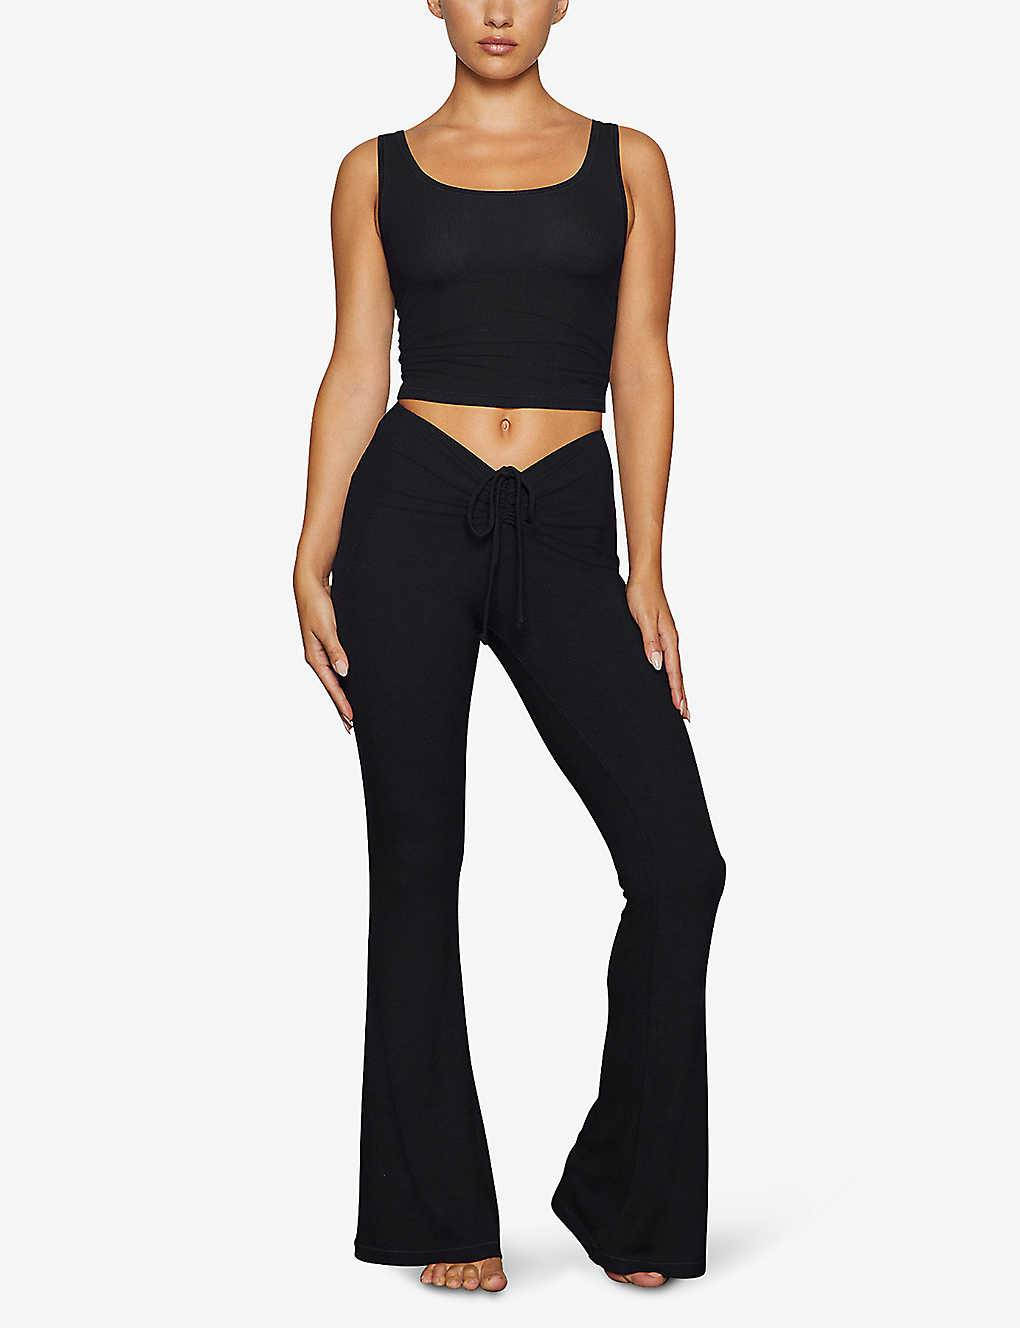 https://cms-cdn.thesolesupplier.co.uk/2023/03/skims-soft-lounge-foldover-stretch-woven-trousers-onyx-full-image.jpg